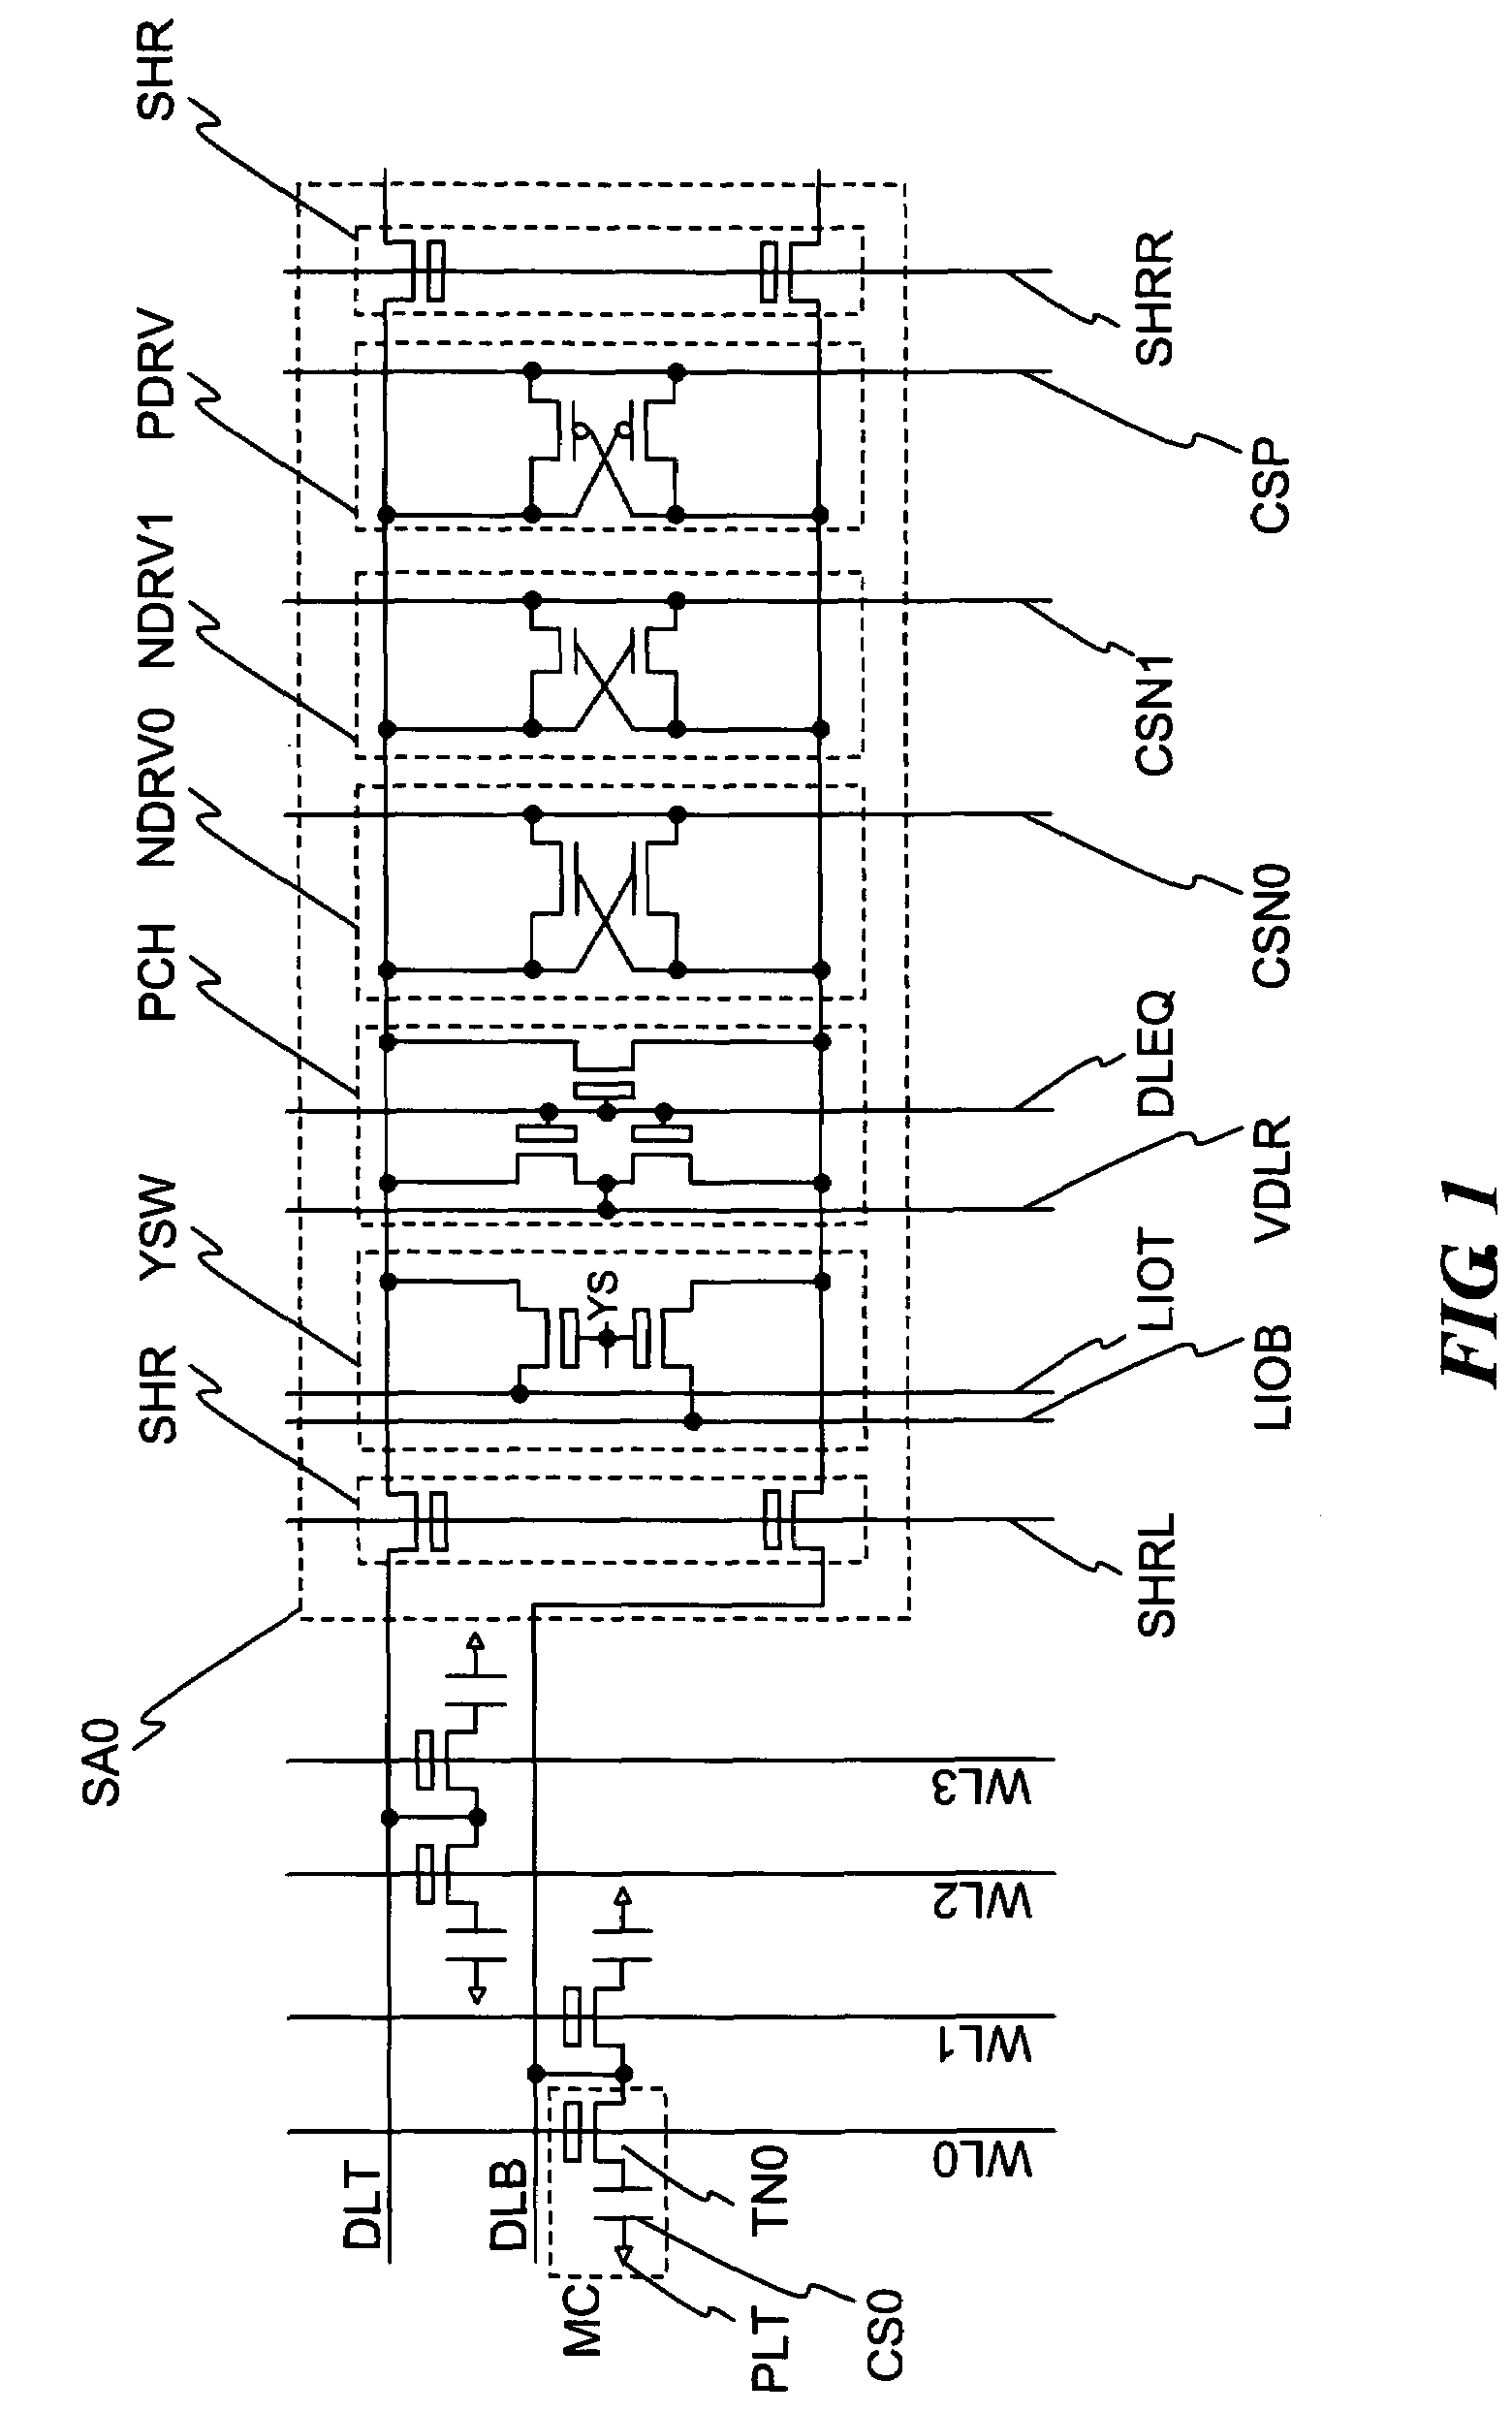 Memory device having high speed sense amplifier comprising pull-up circuit and pull-down circuits with different drivability for each